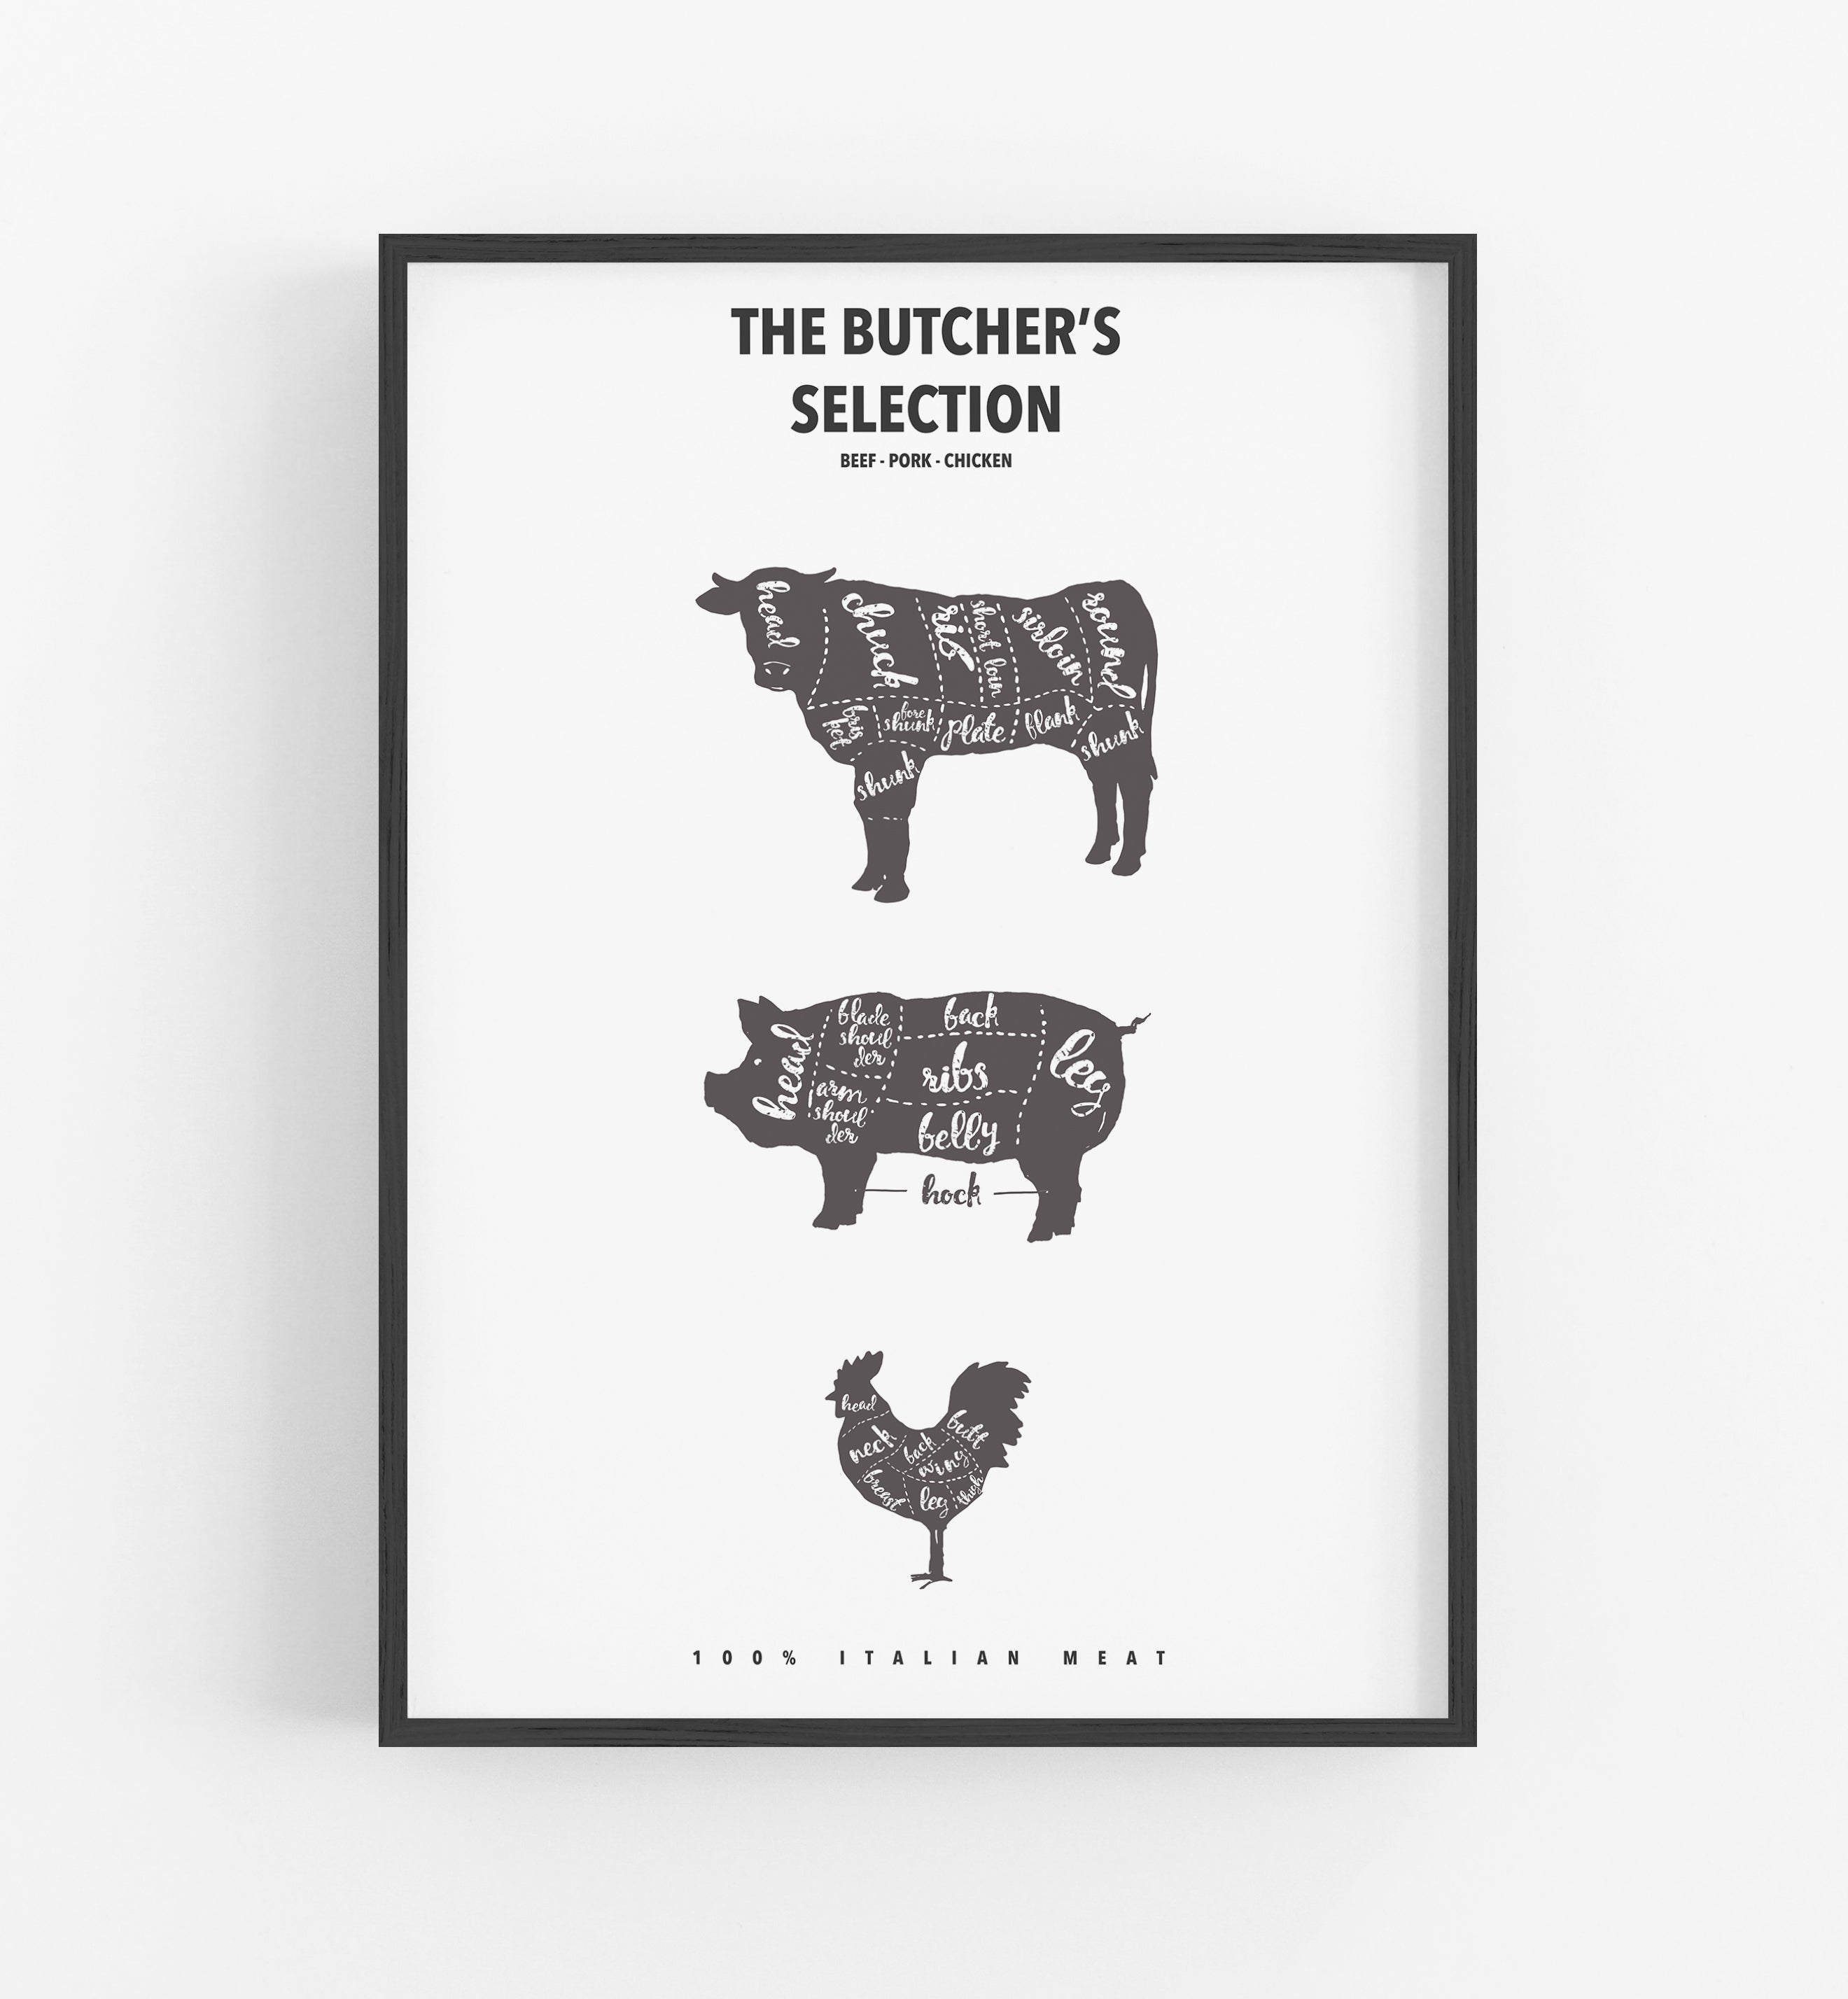 THE BUTCHER’S SELECTION